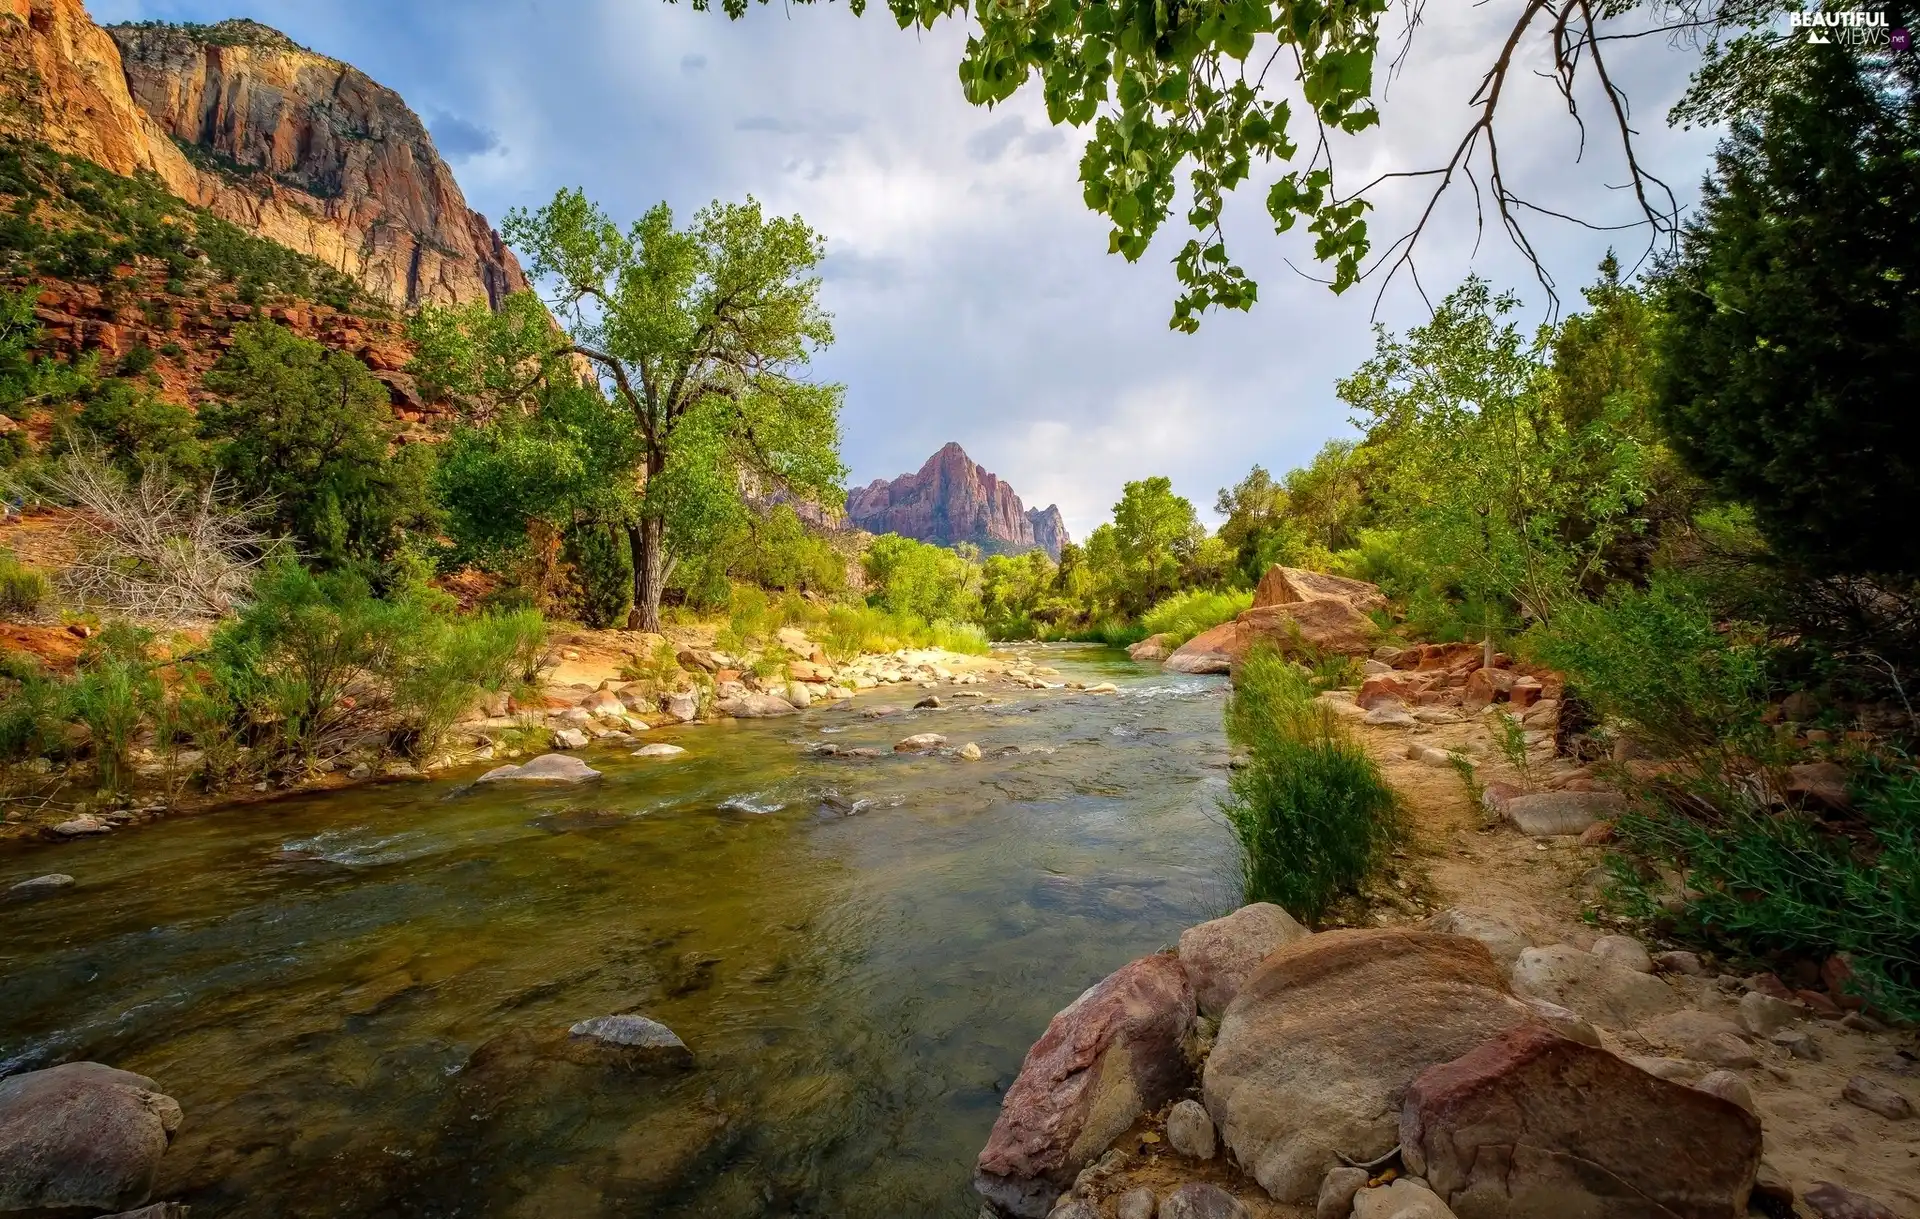 Virgin River, Stones, The United States, trees, Utah State, Watchman Mountains, Zion National Park, viewes